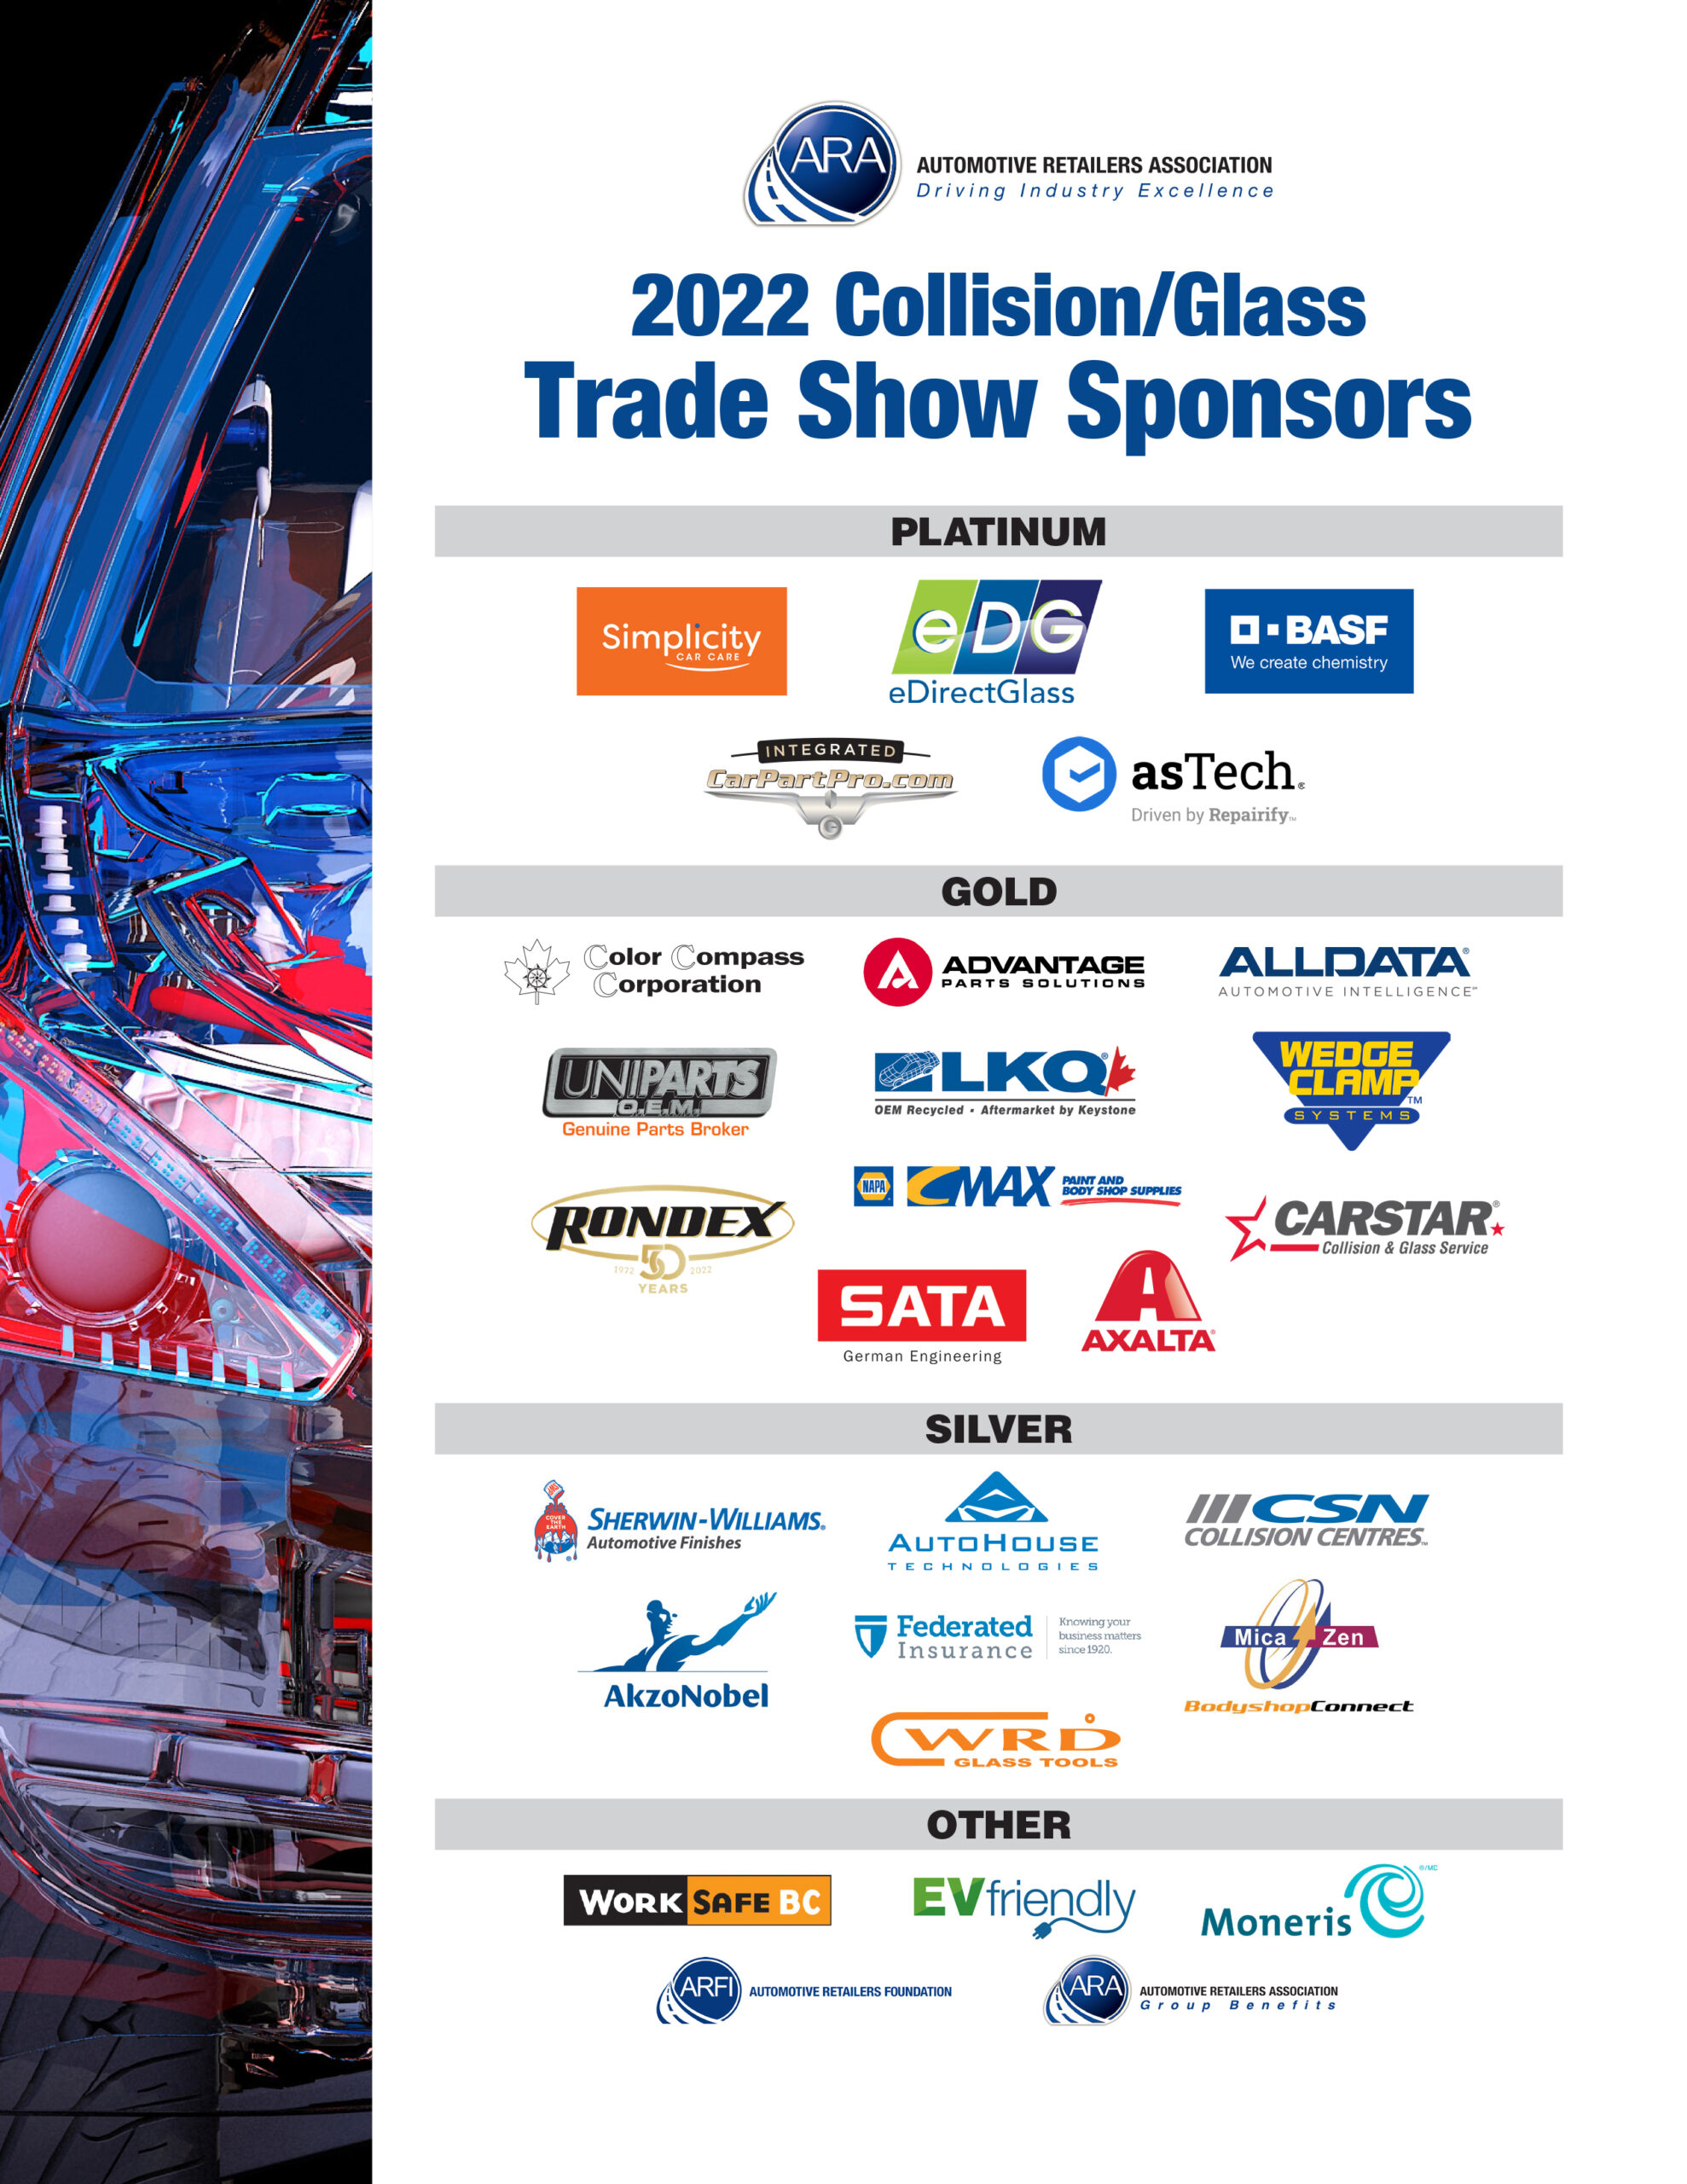 2022 Collision/Glass Trade Show Sponsors